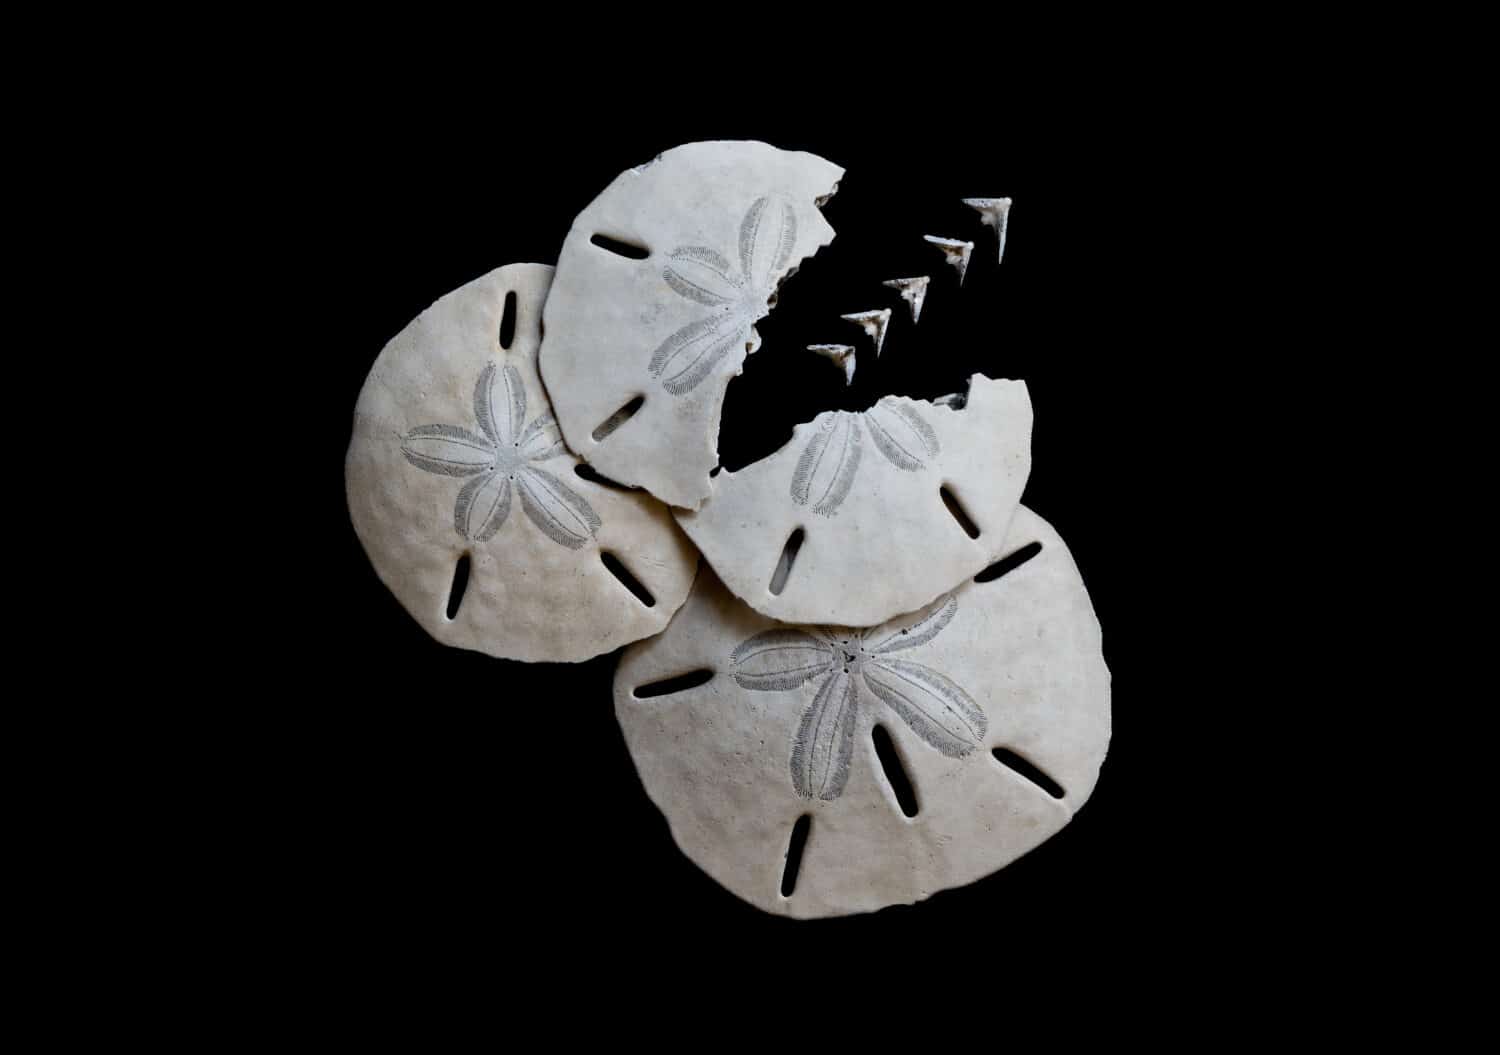 Three sand dollars on a black background, one sand dollar is broken and five white doves from inside are flying outwards.